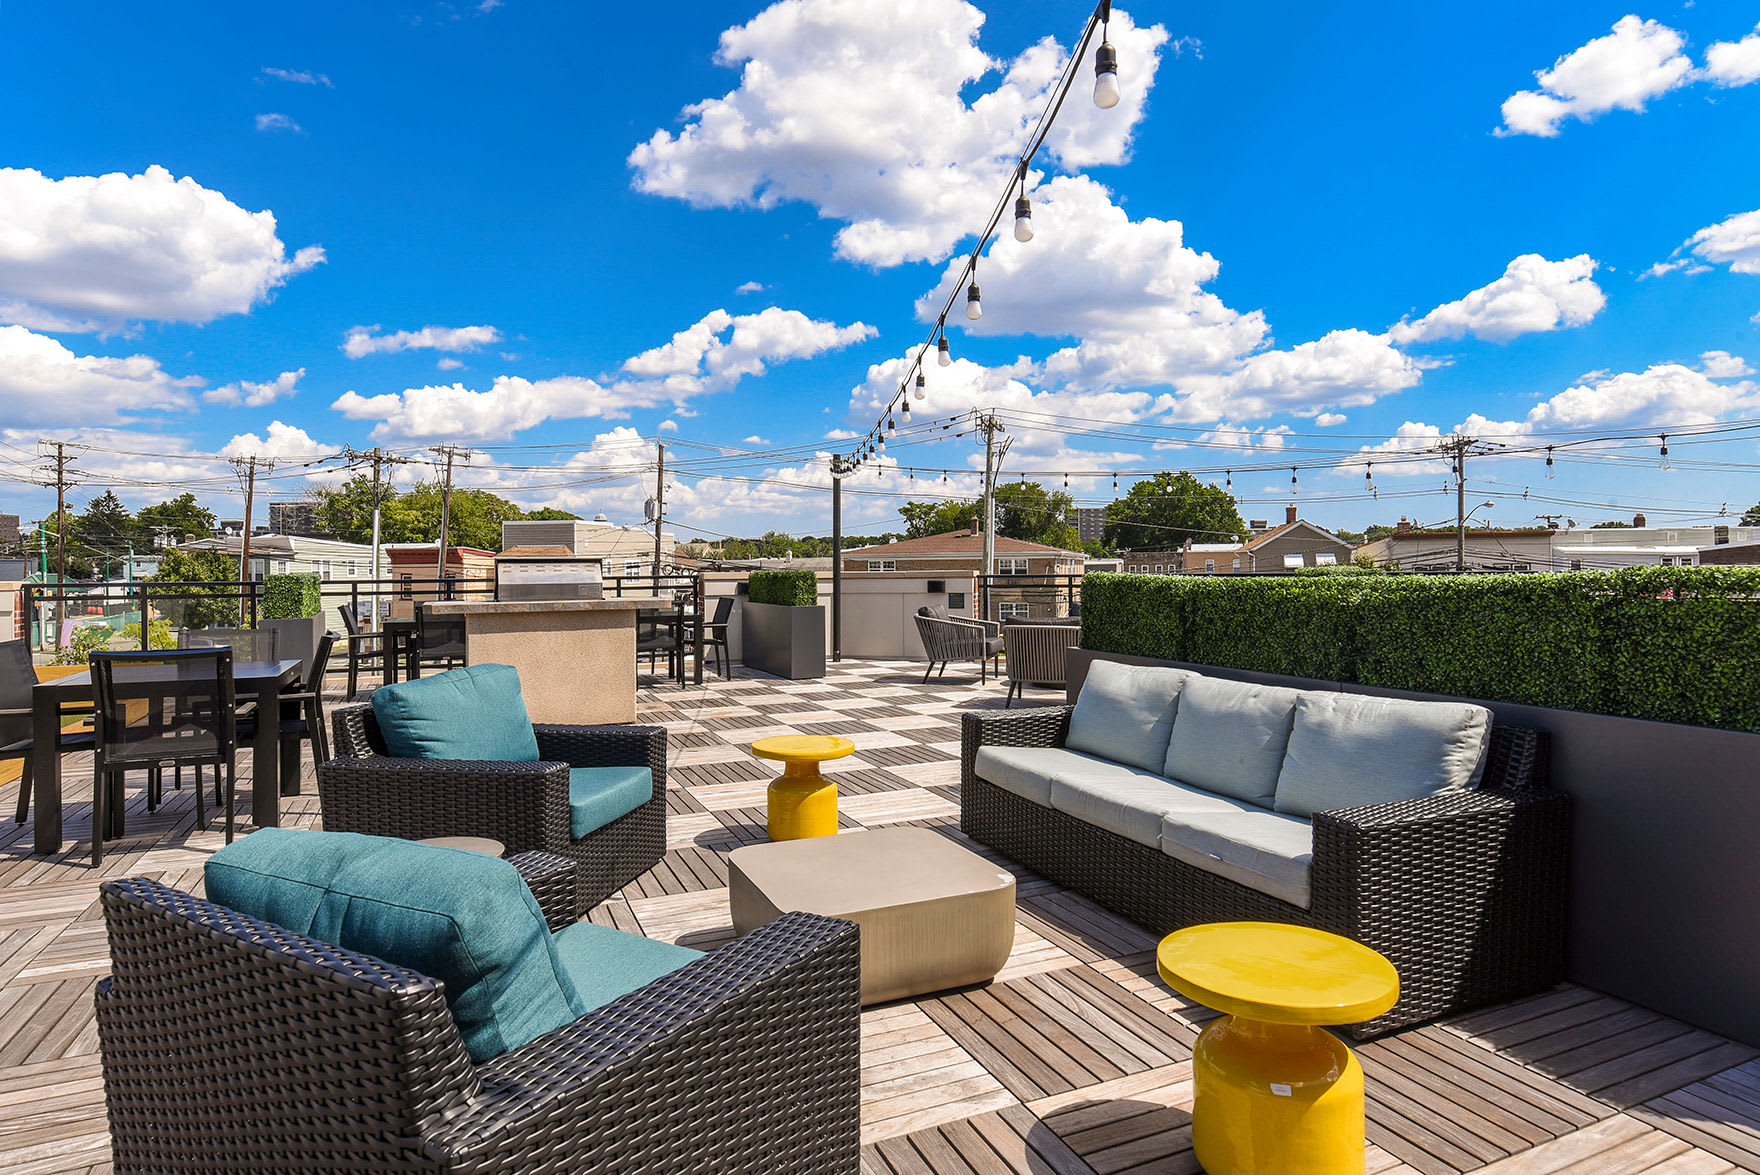 Rooftop patio with lounge chairs atSilverLake in Belleville, New Jersey